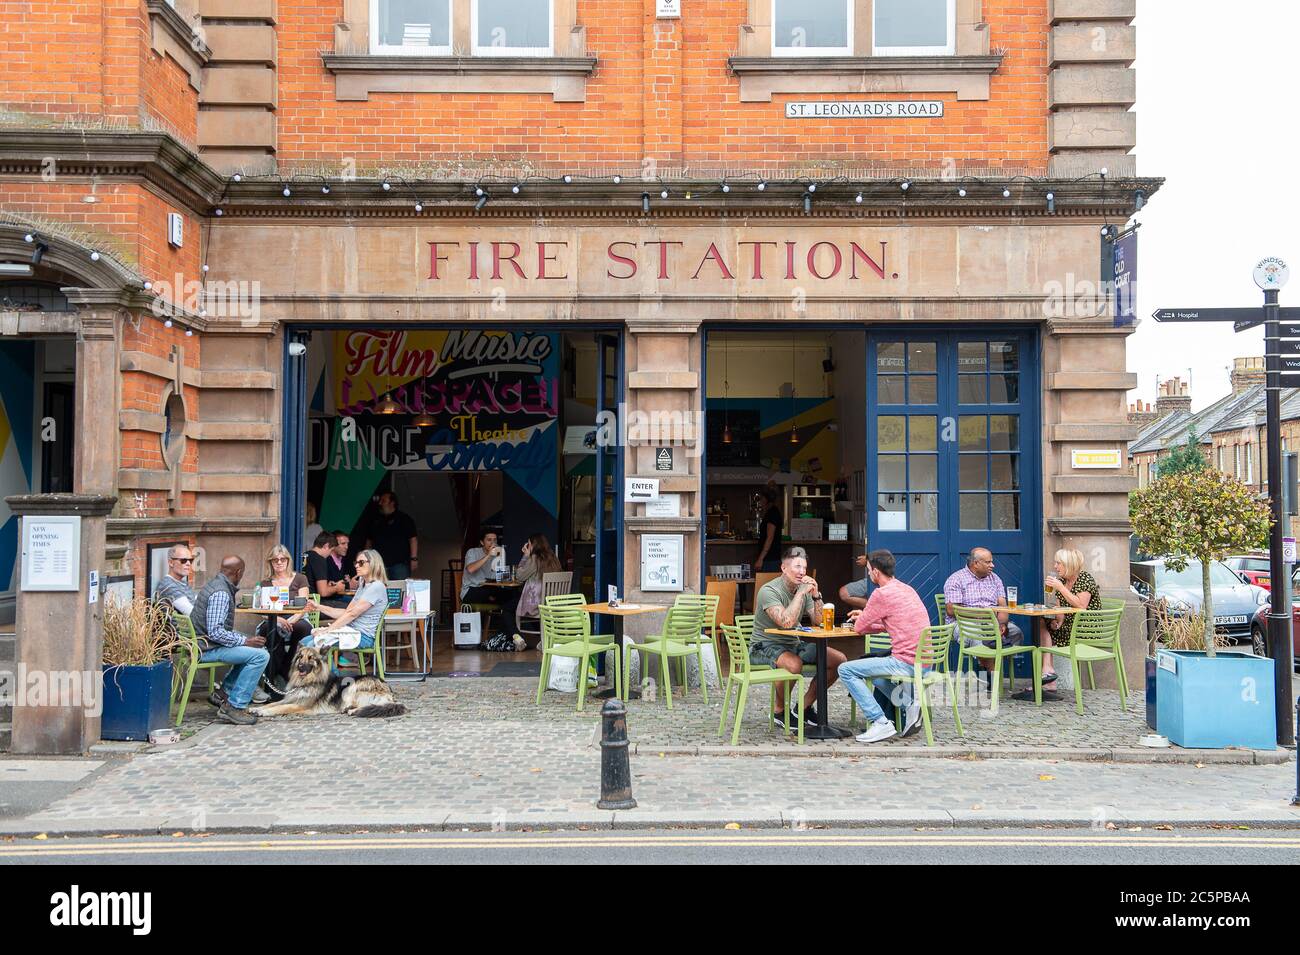 Windsor, Berkshire, UK. 4th July, 2020. Pub goers sit at tables outside the Old Court at the former Fire Station building in Windsor, Berkshire. Pubs in England were allowed to reopen today for the first time since the Coronavirus lockdown in March. Credit: Maureen McLean/Alamy Live News Stock Photo